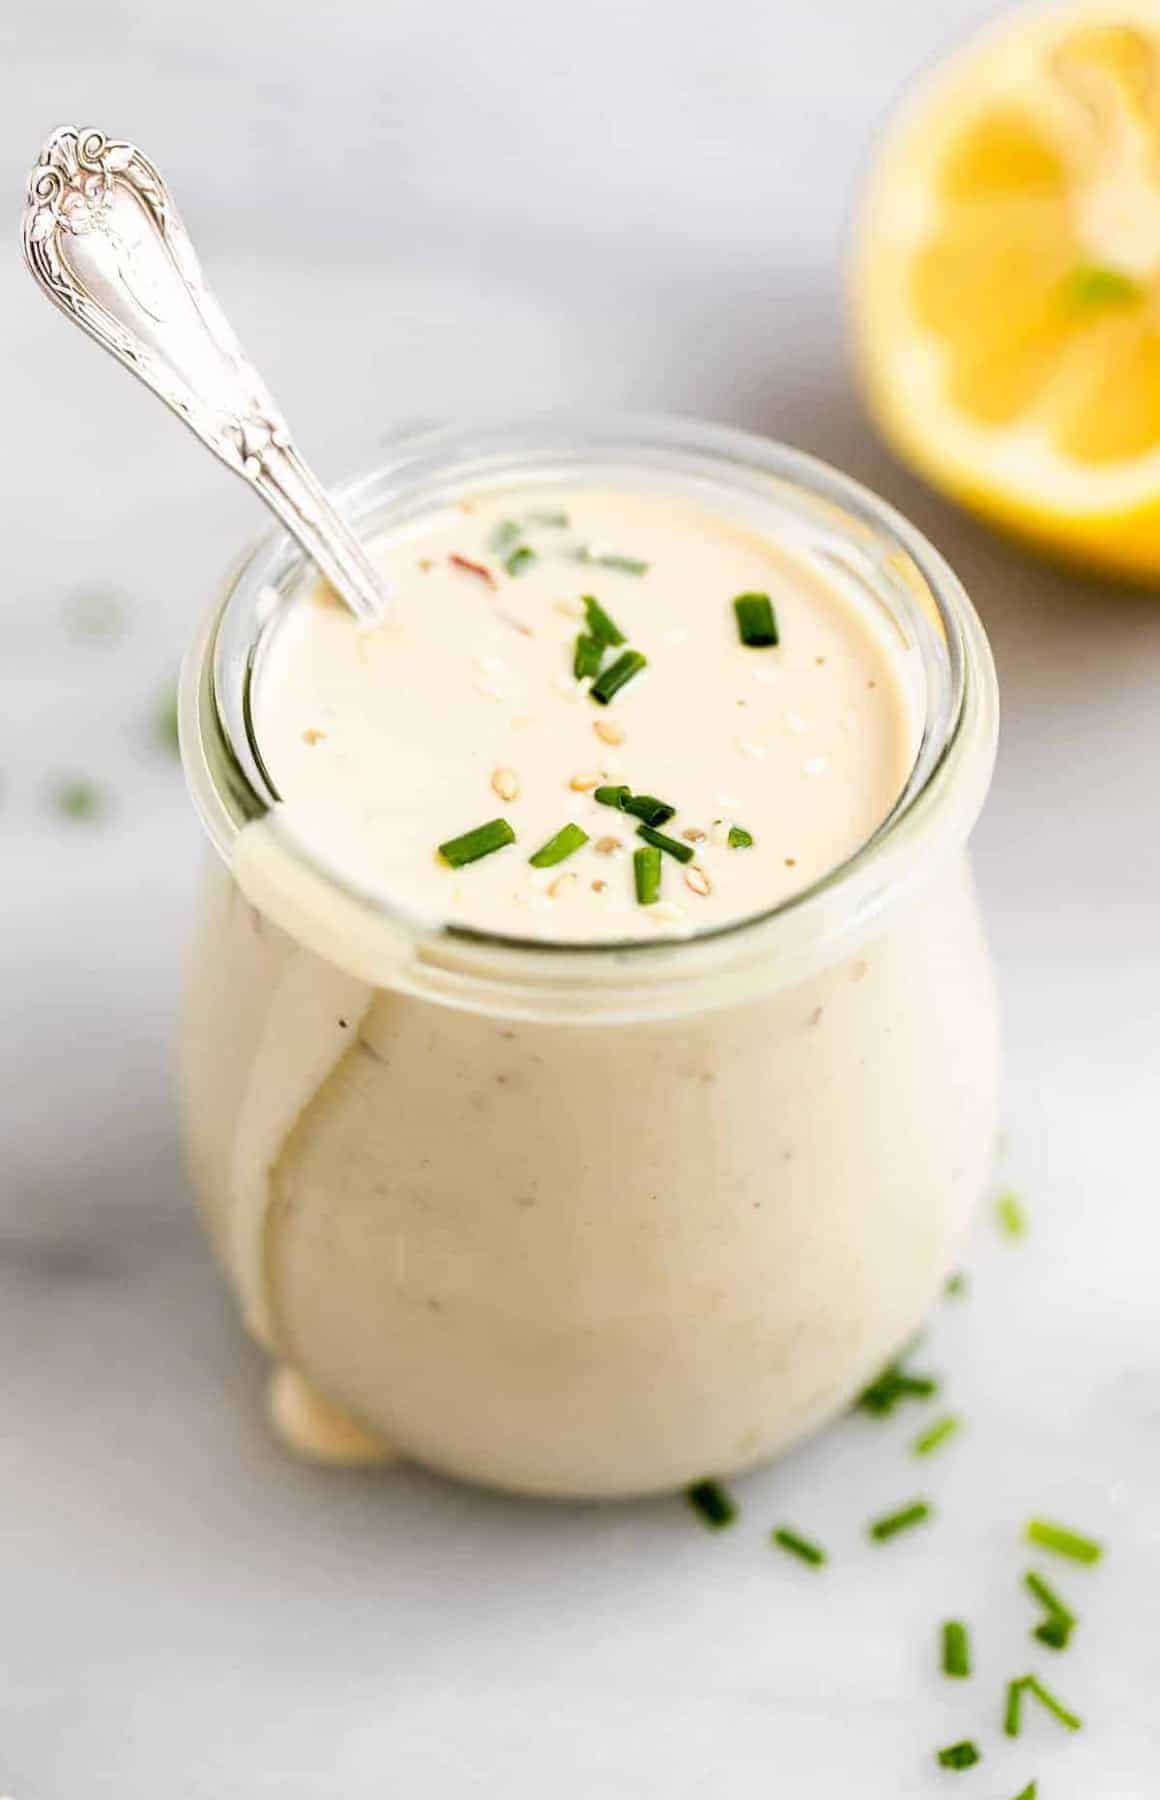 Glass jar with the tahini dressing dripping down the side.